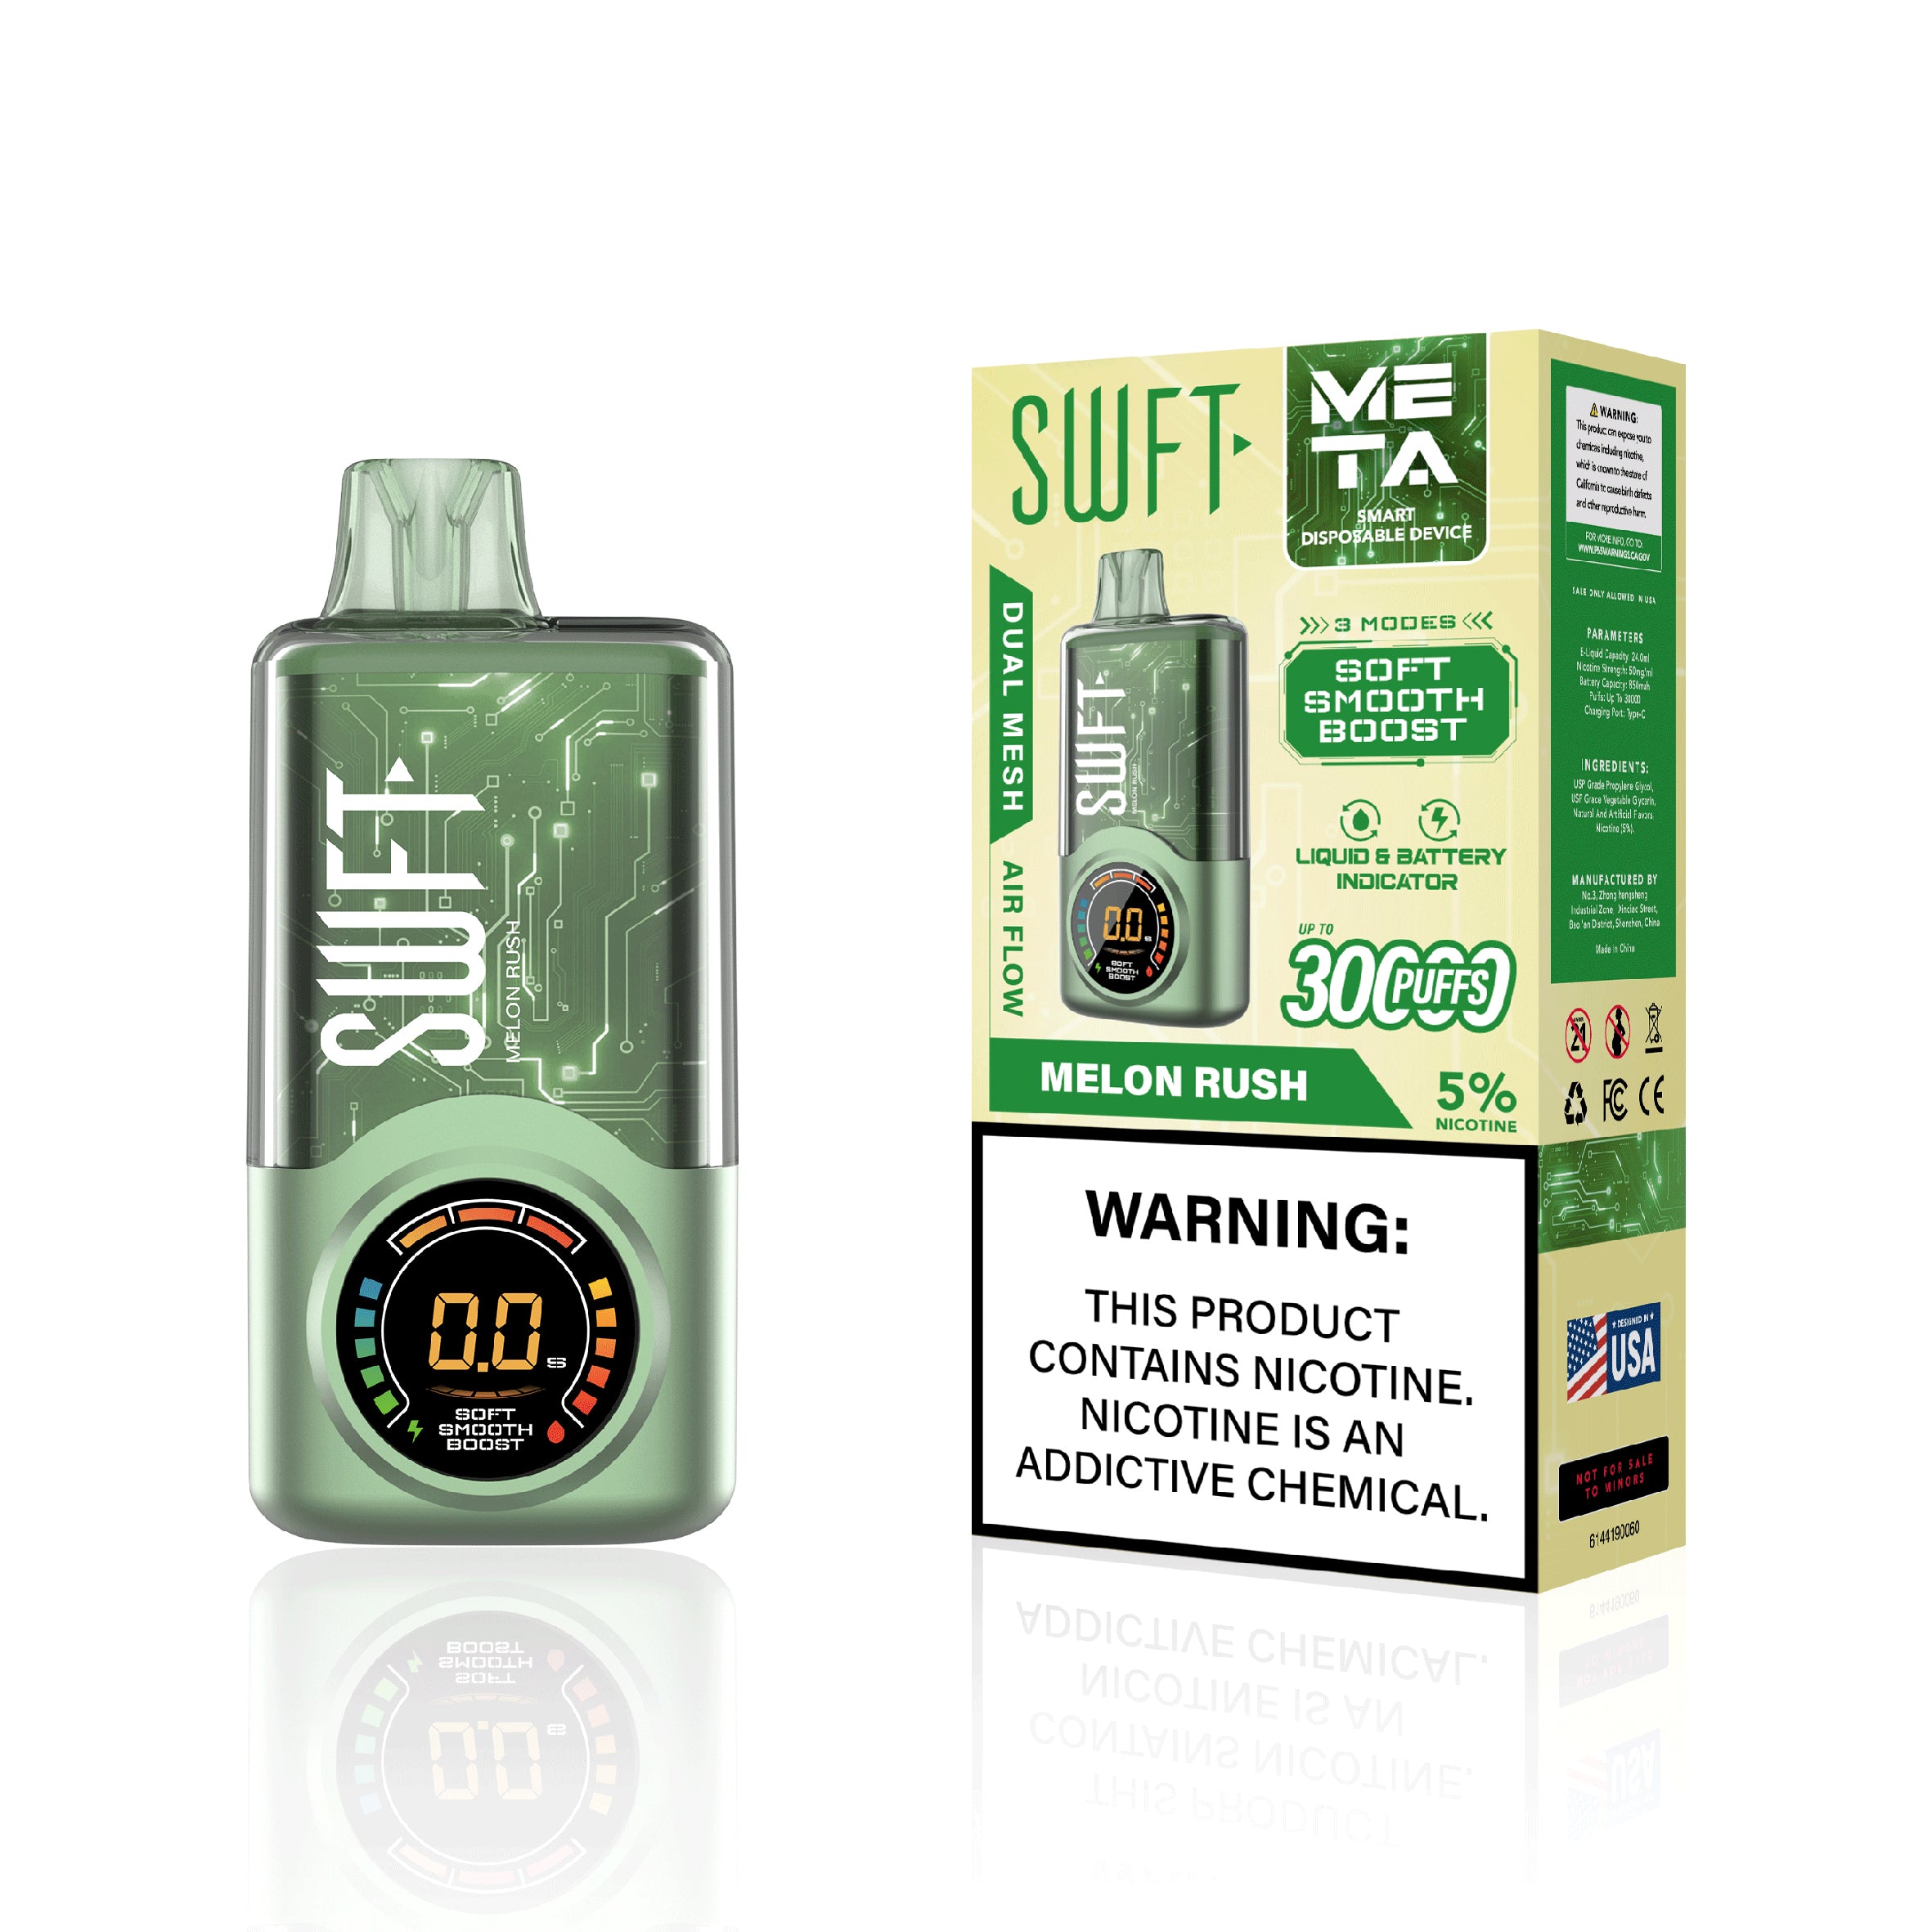 SWFT META 30000 PUFFS ADJUSTABLE WATTAGE DISPOSABLE VAPE DEVICE DUAL MESH COIL LIQUID AND BATTERY INDICATOR MELON RUSH